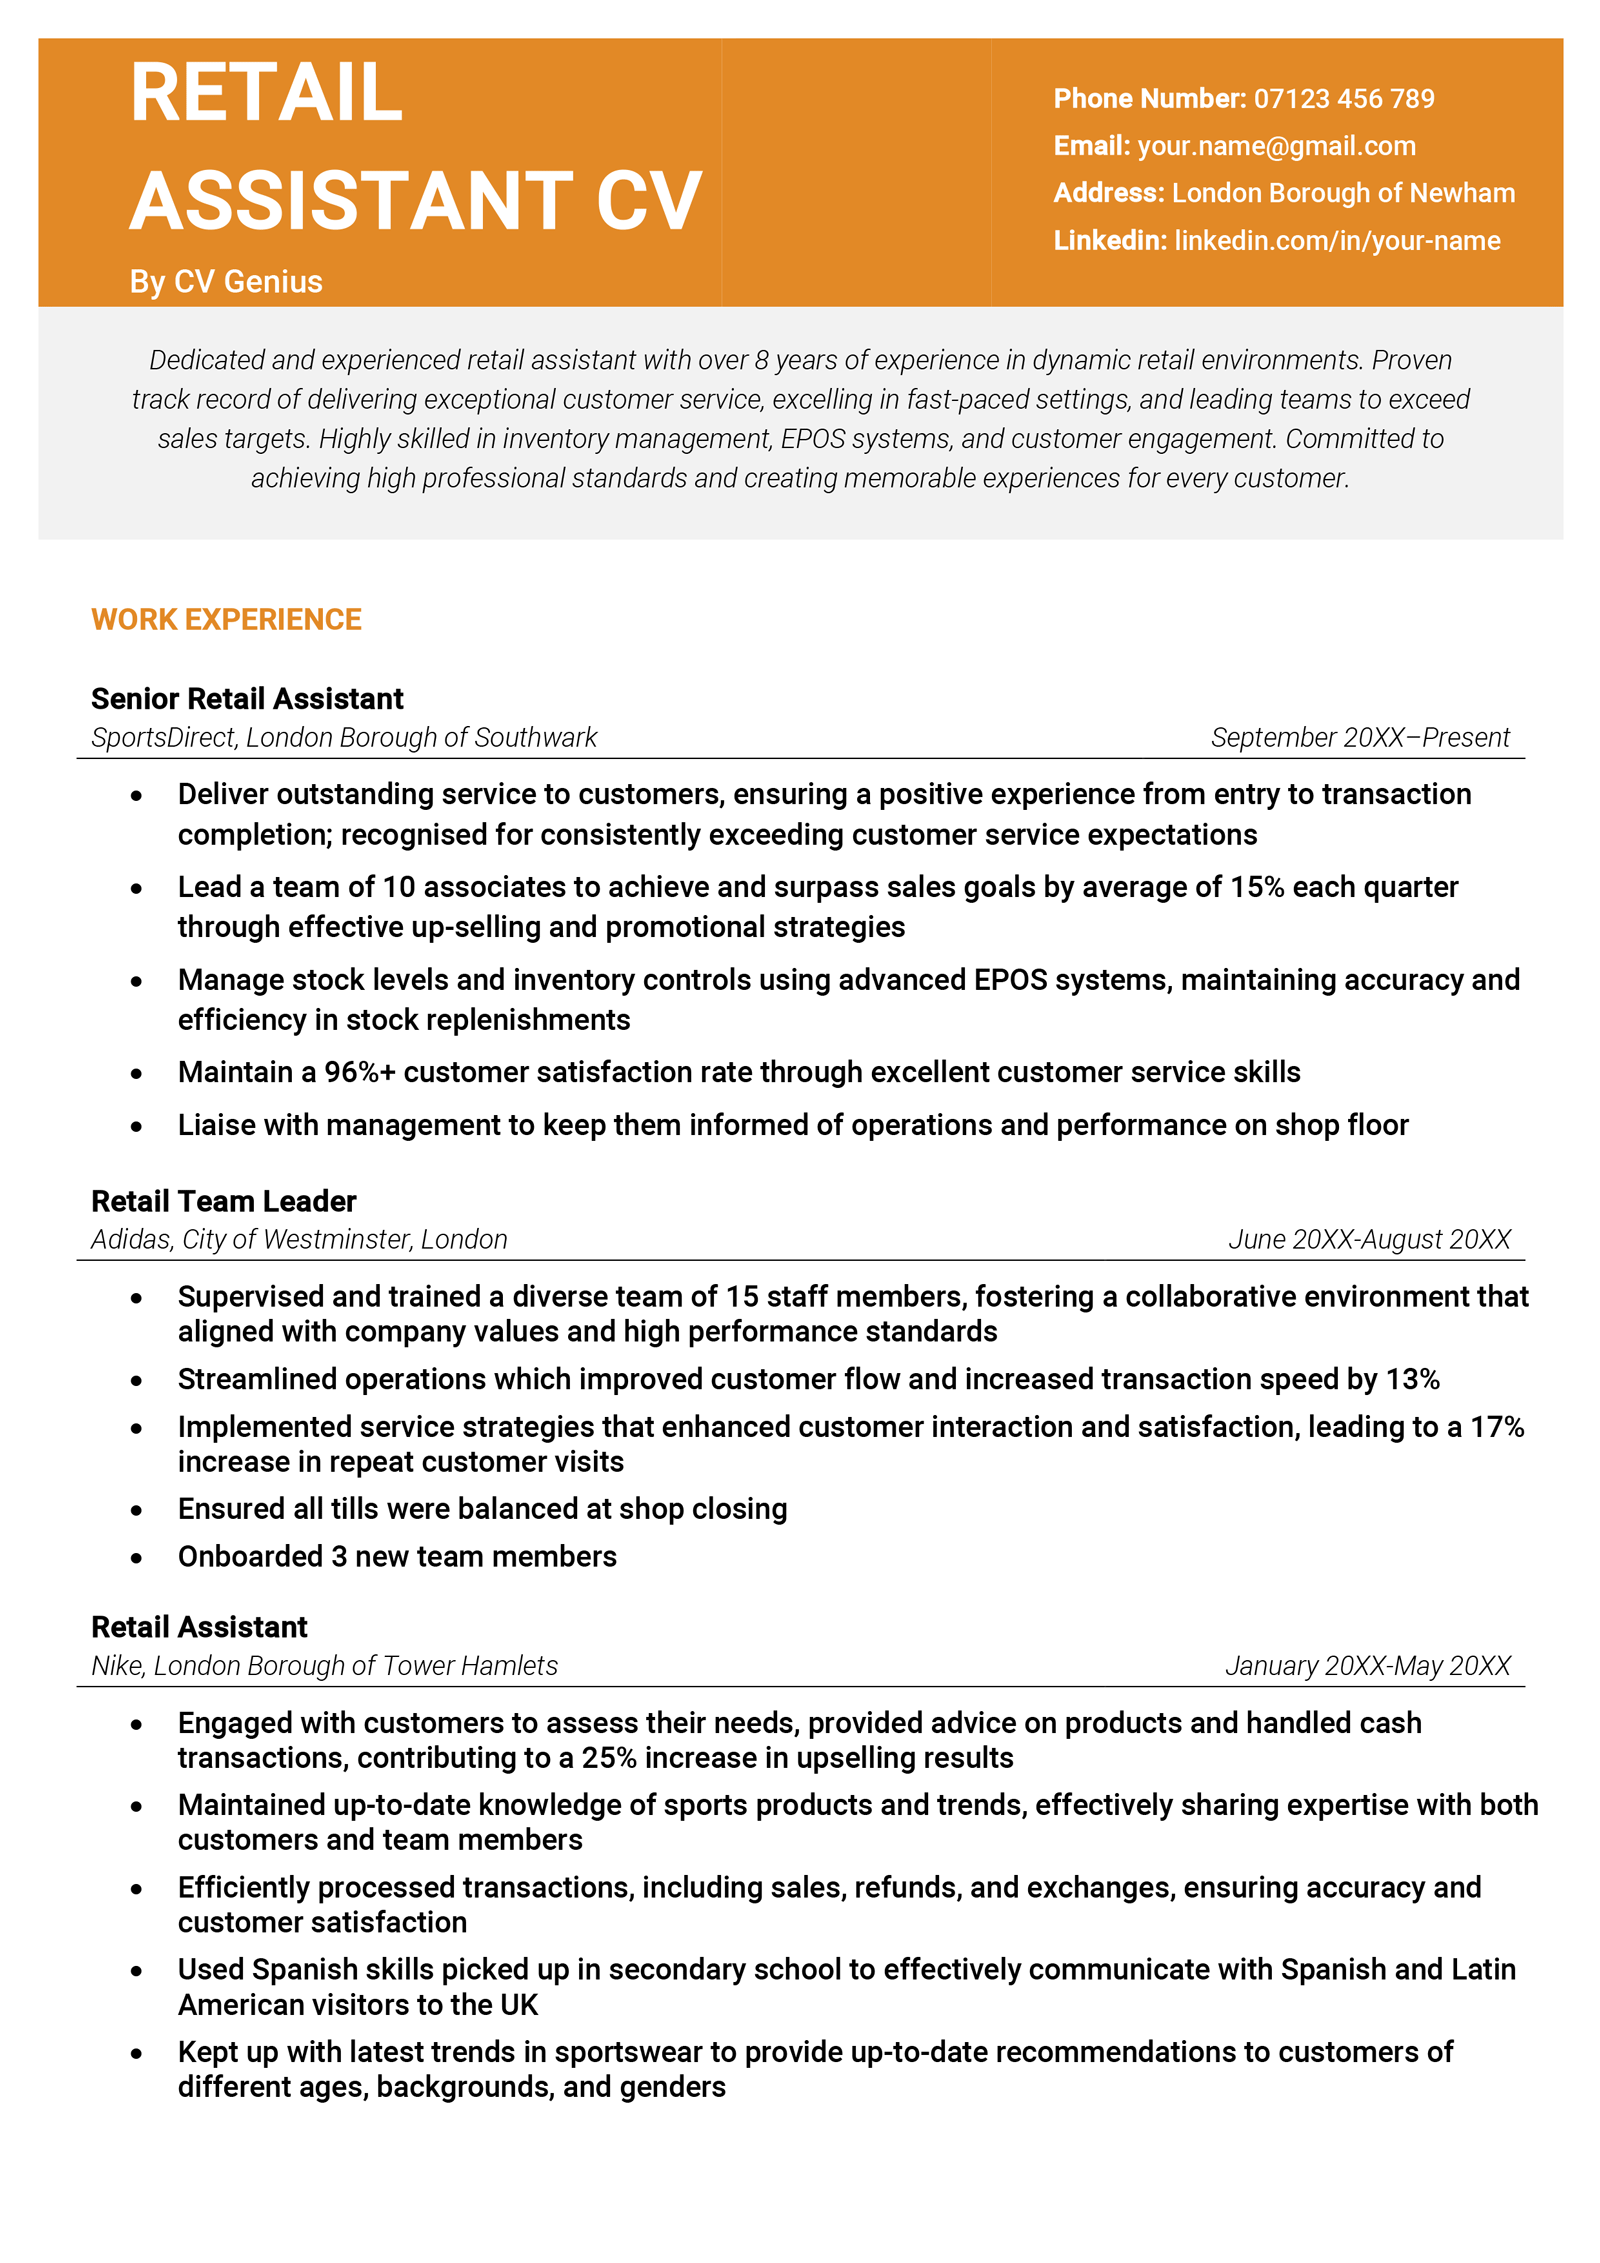 A retail assistant CV example that uses an orange header and a grey background for its personal statement, as well as coloured highlights throughout.